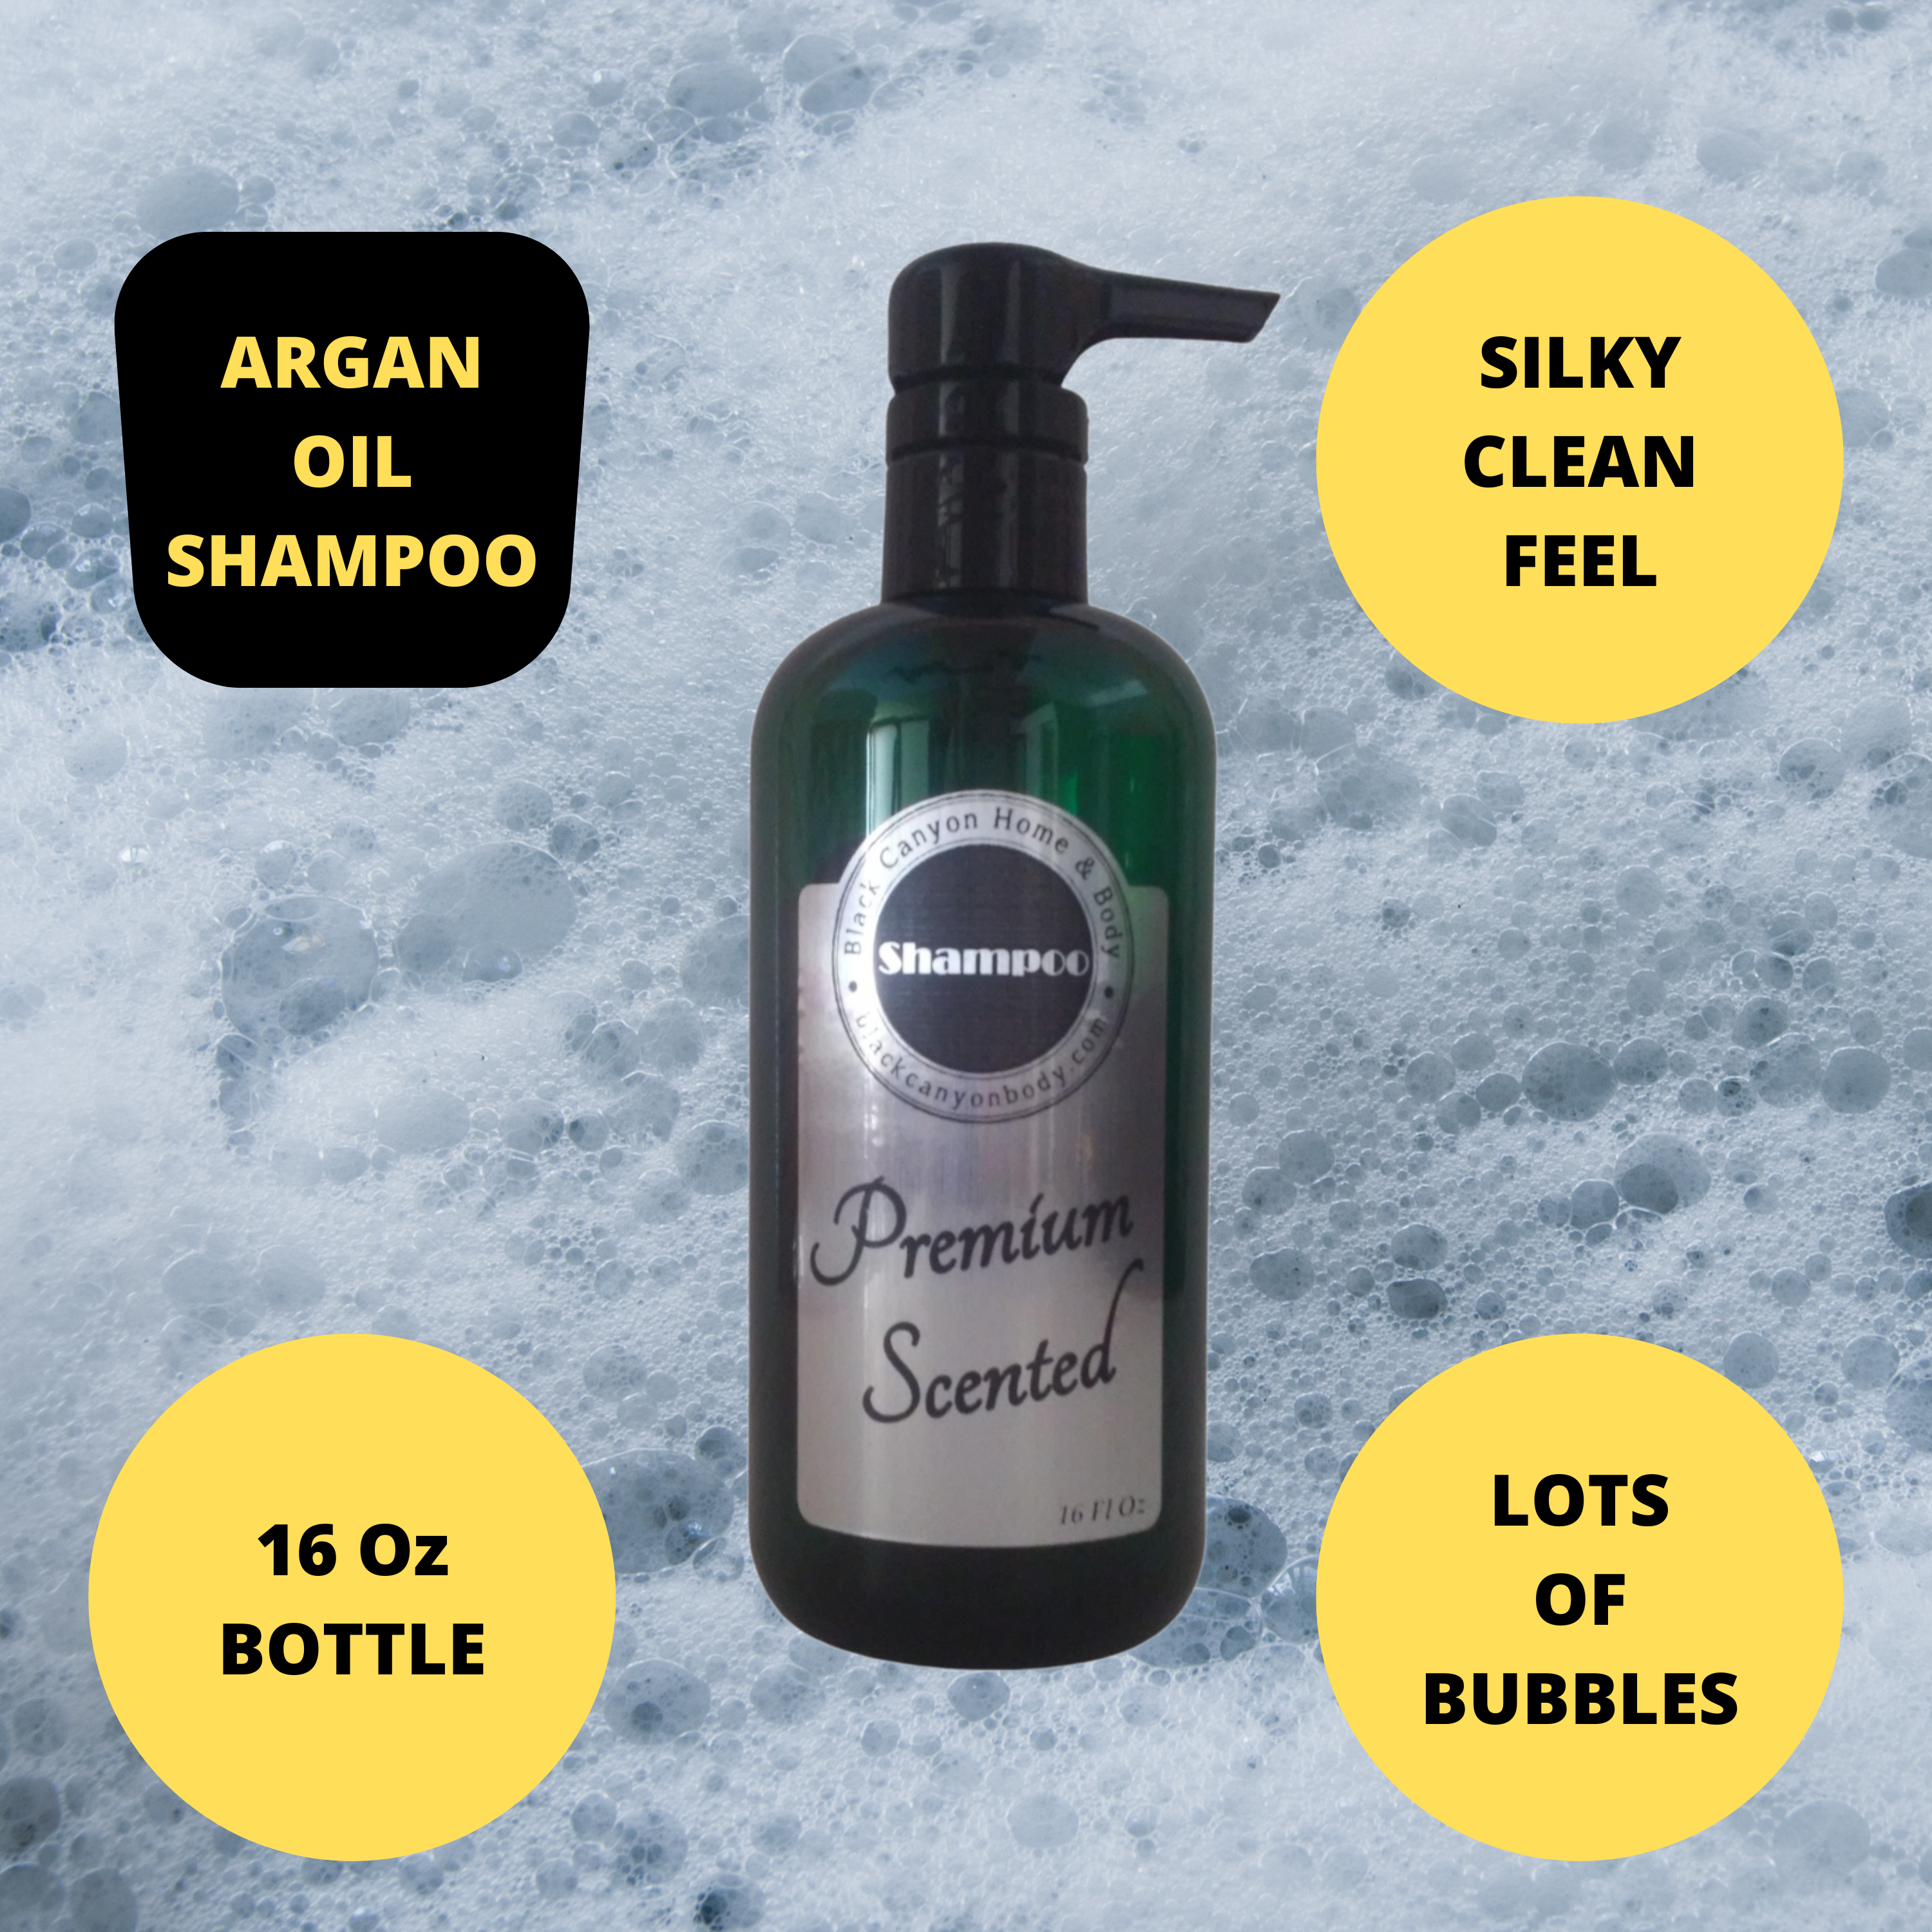 Black Canyon Autumn Breeze Scented Shampoo with Argan Oil